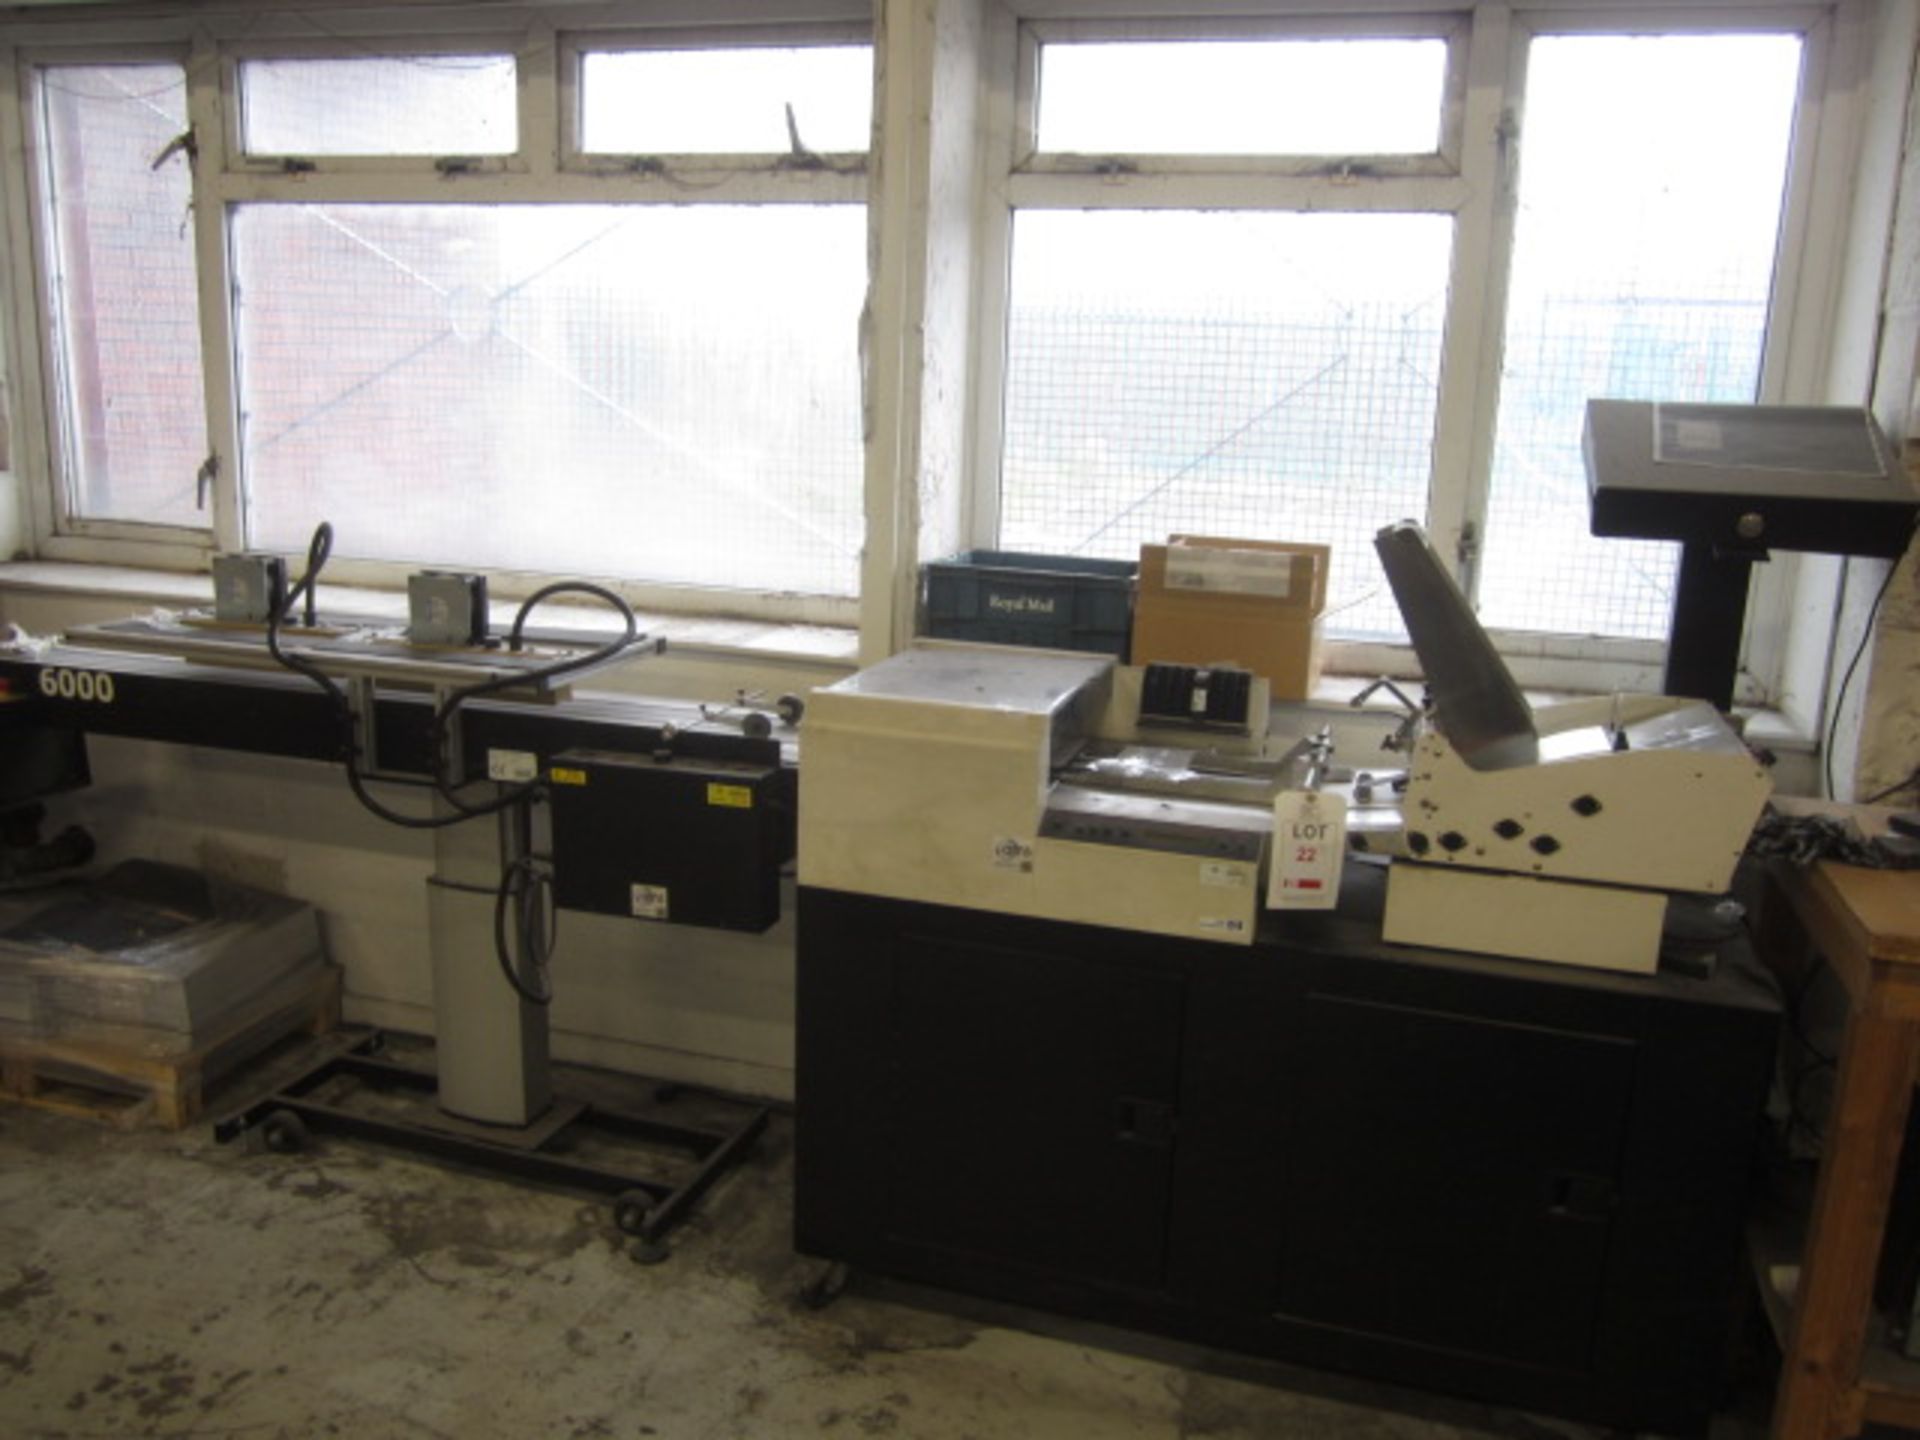 Astrojet 3800 envelope printer, serial no. DR26-064 (2012), with AMS MHDC 6000-2000, serial no.